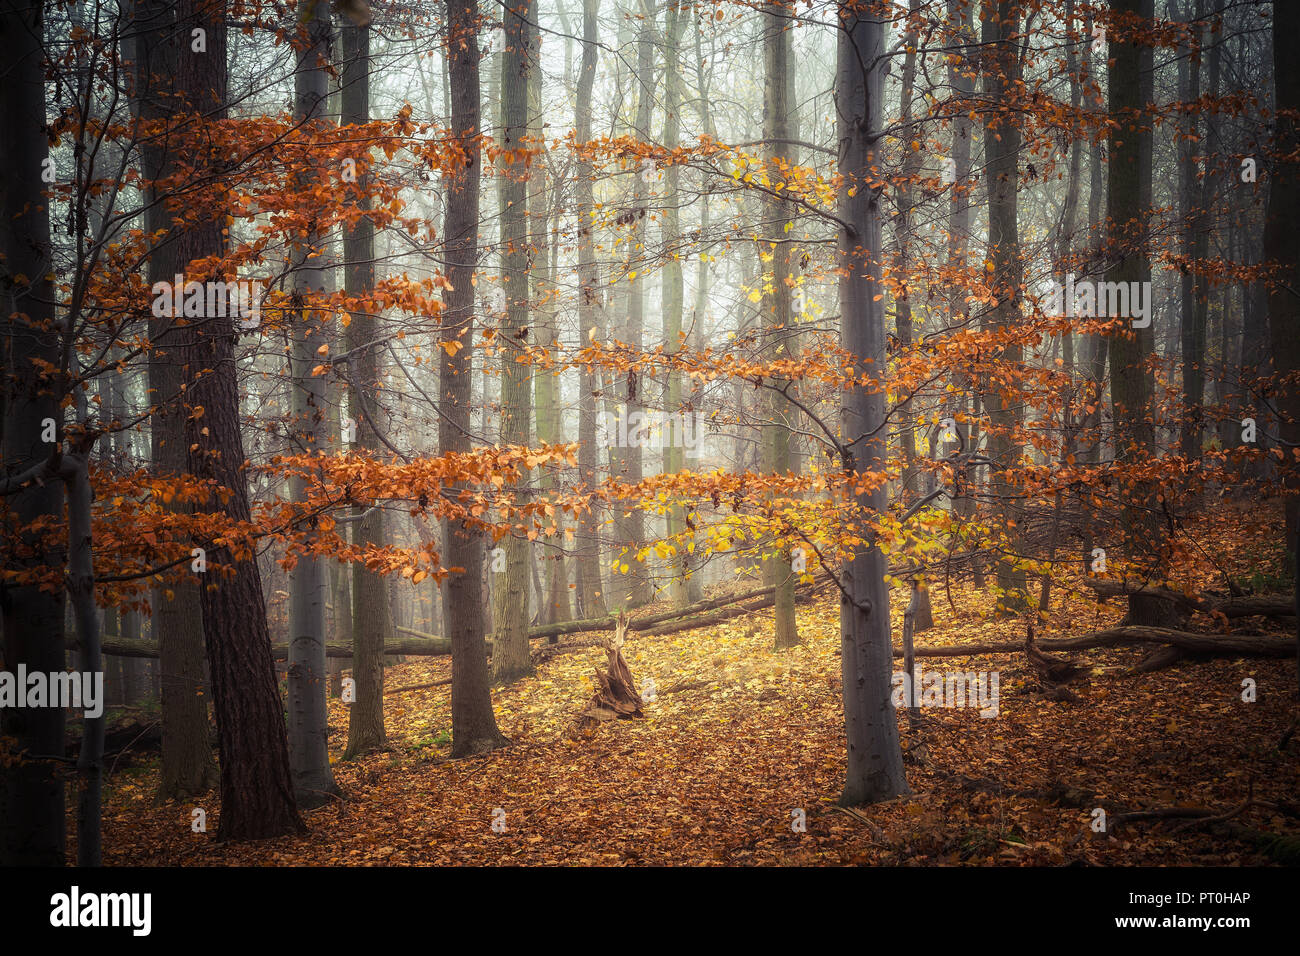 The beech forest in the Foliage in the fall Stock Photo